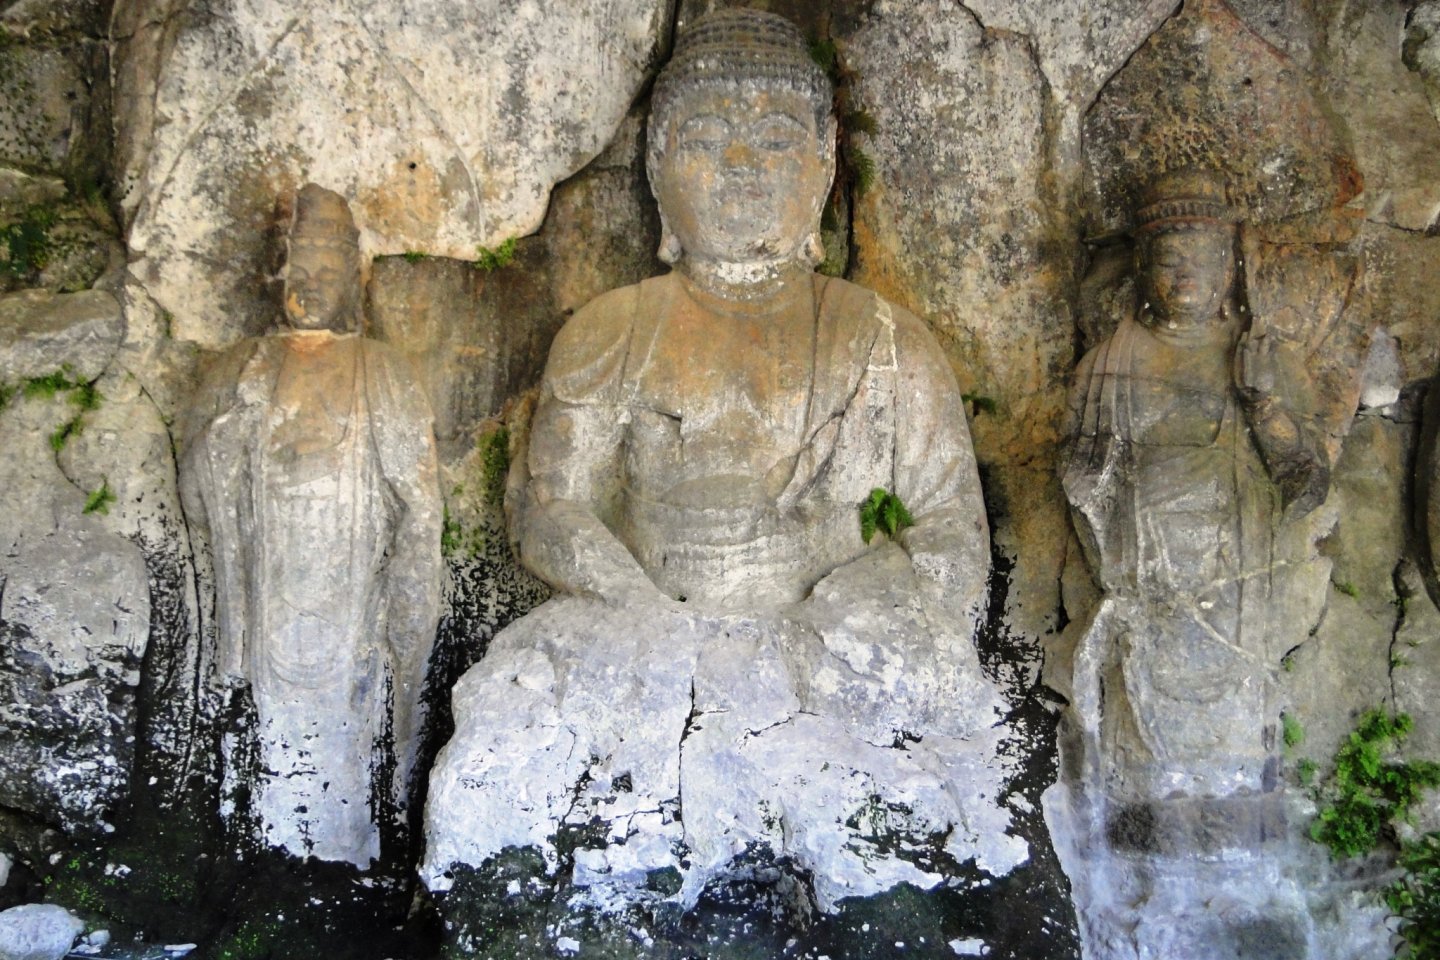 Buddha statues carved into the cliffs outside Usuki town